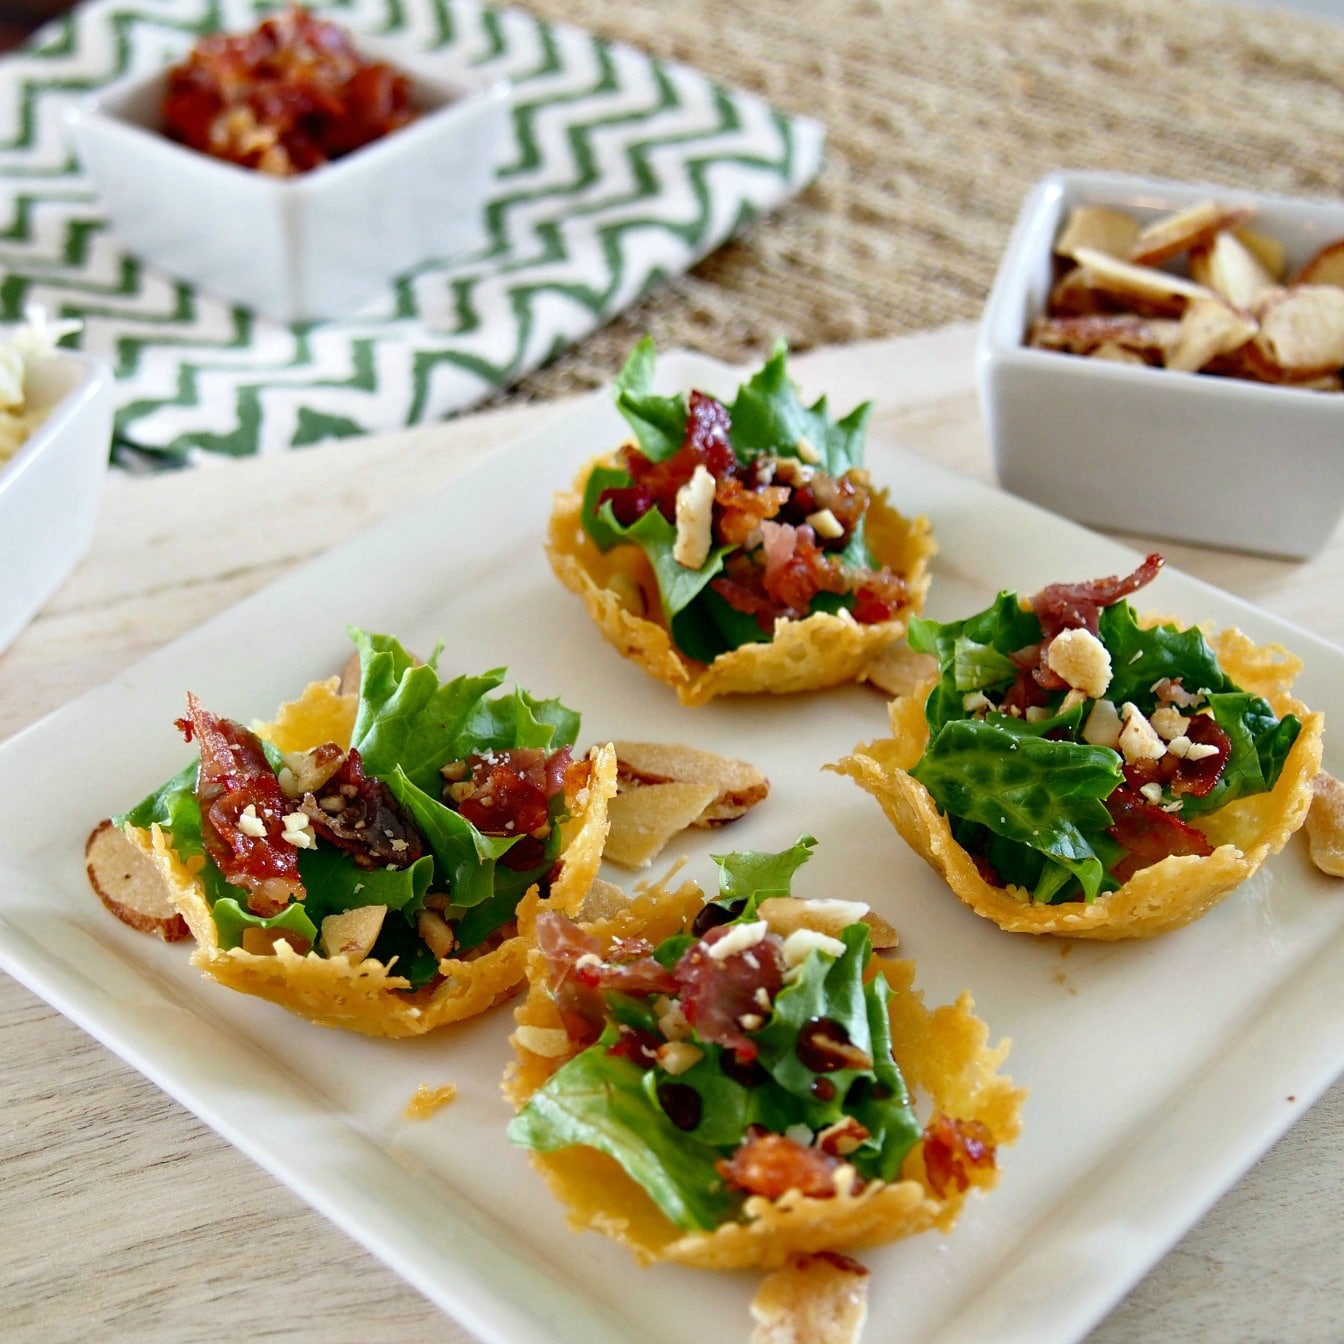 Beautiful Cheese Cup Appetizers to fill with your favorite ingredients. www.simplysated.com